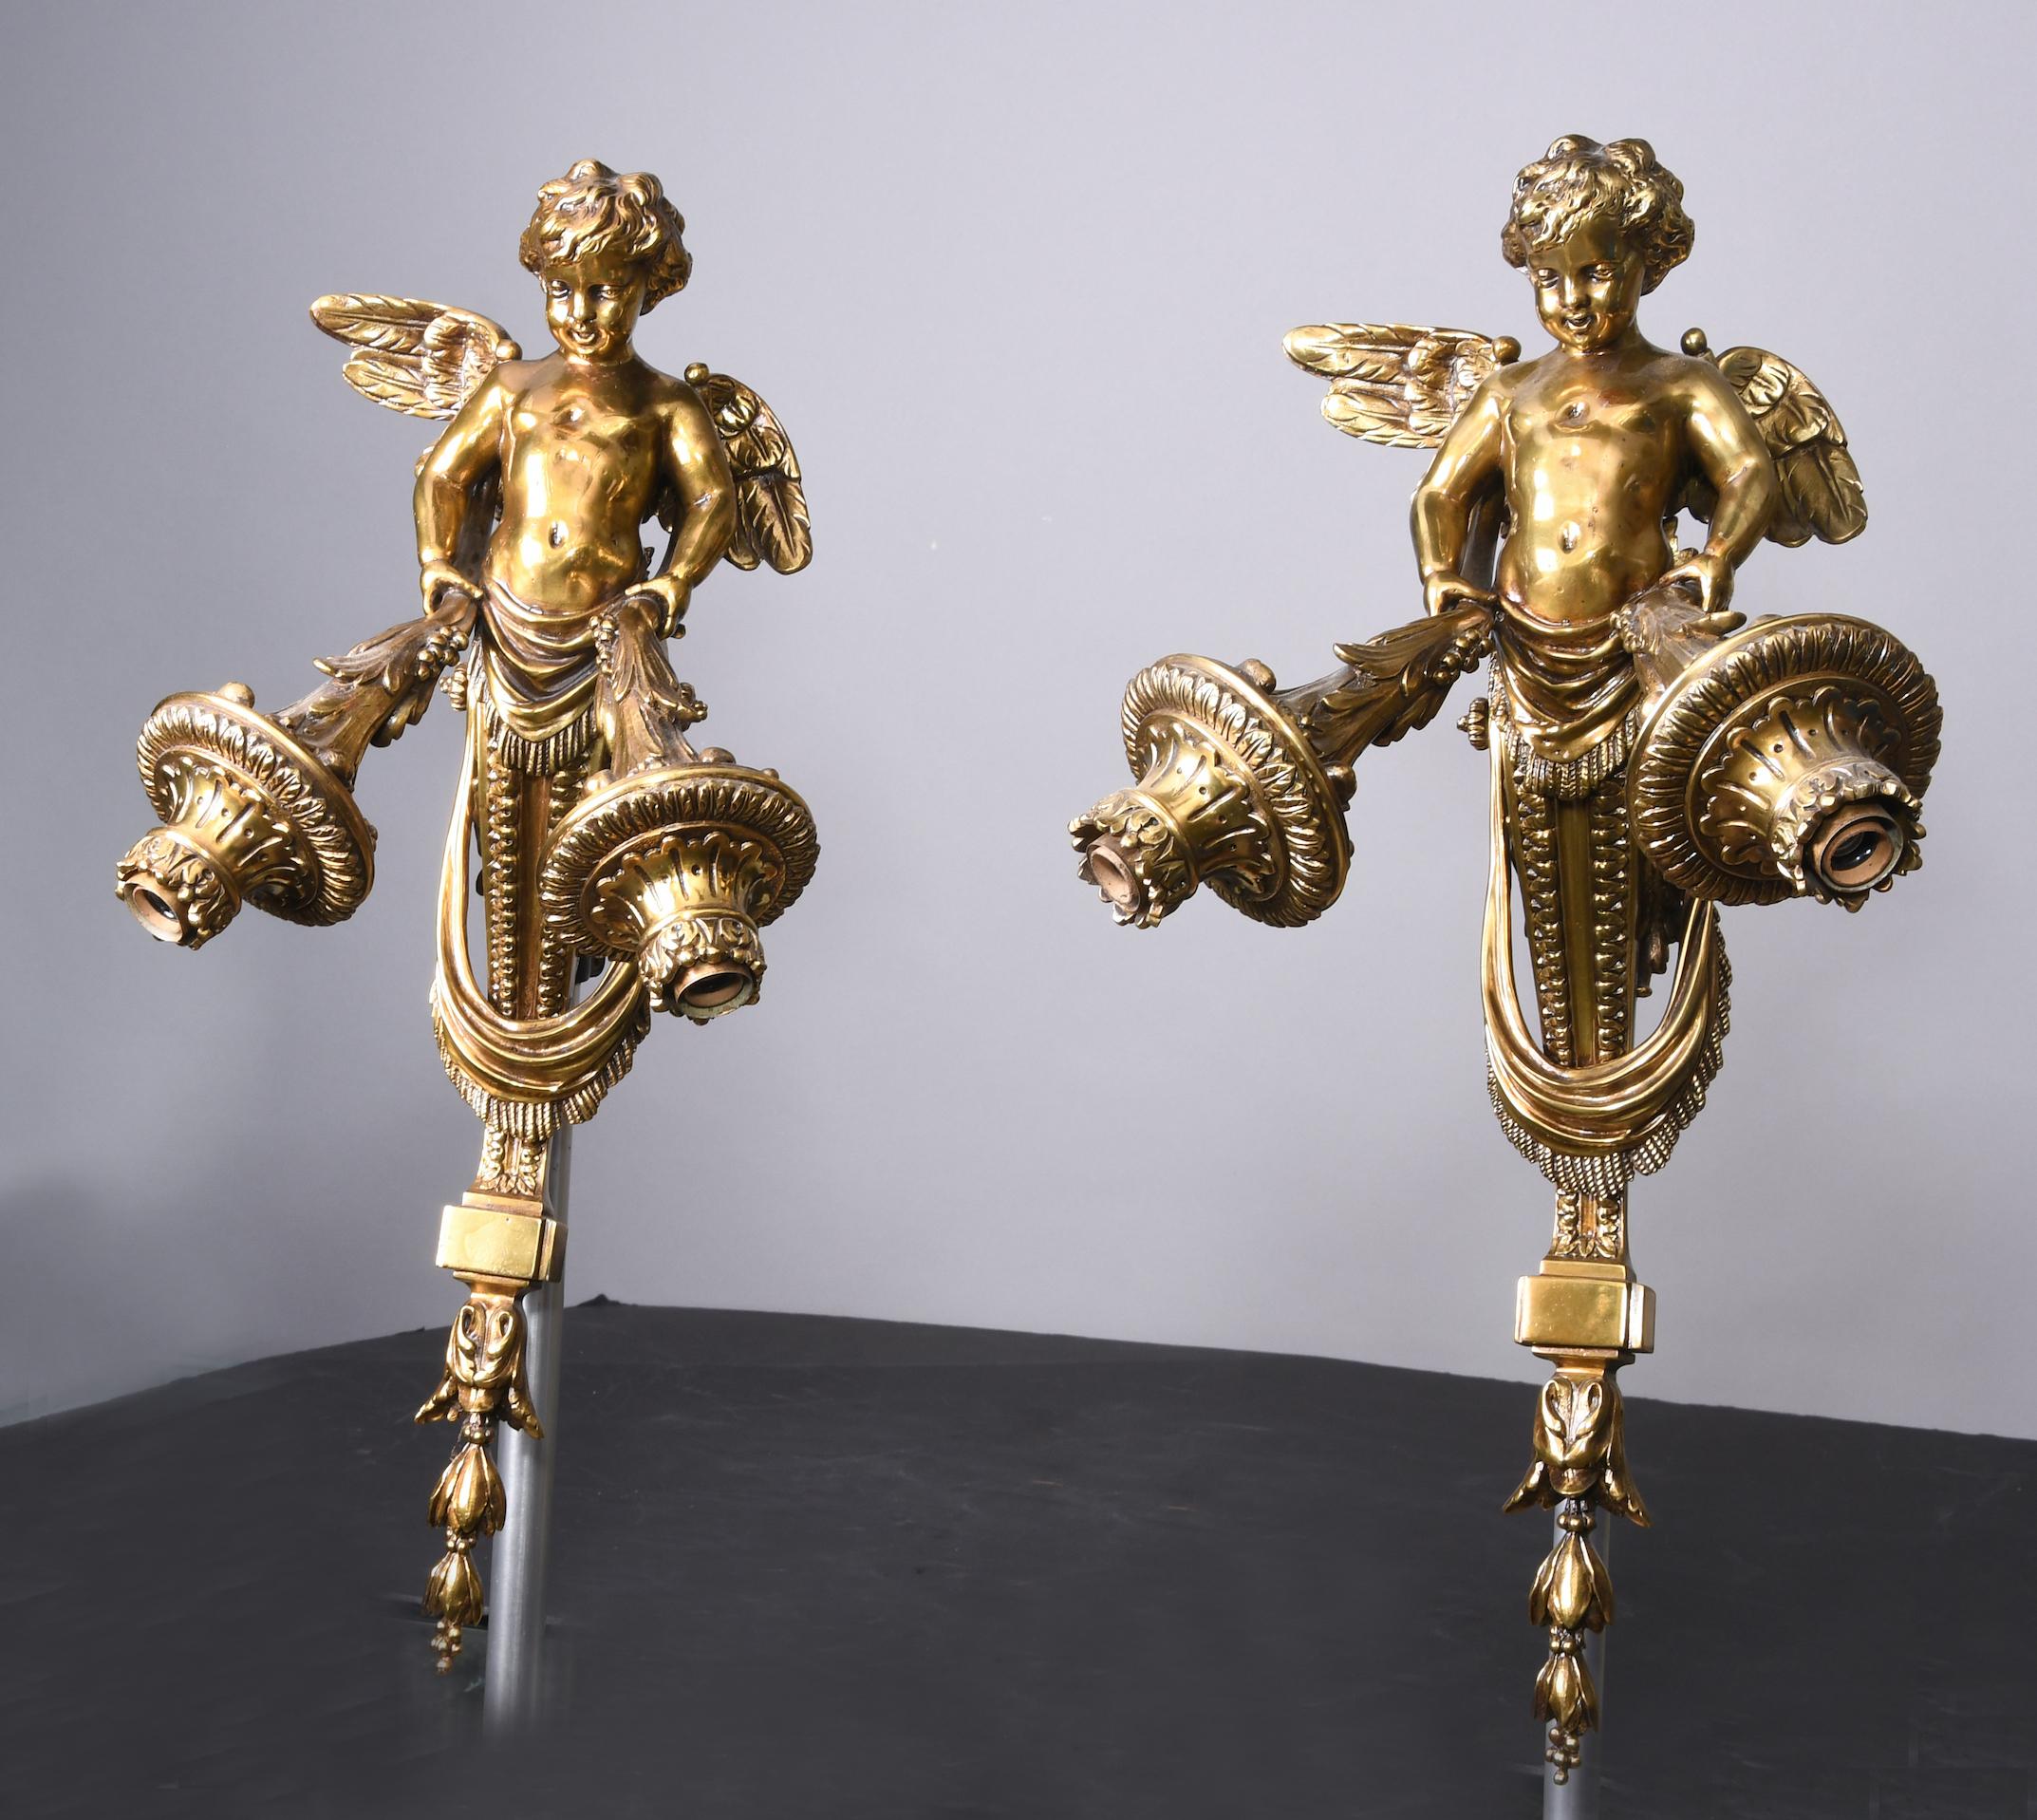 Cast Early 19th Century Pair of Bronze Empire Revival Cherub Wall Sconces/Torcherier For Sale